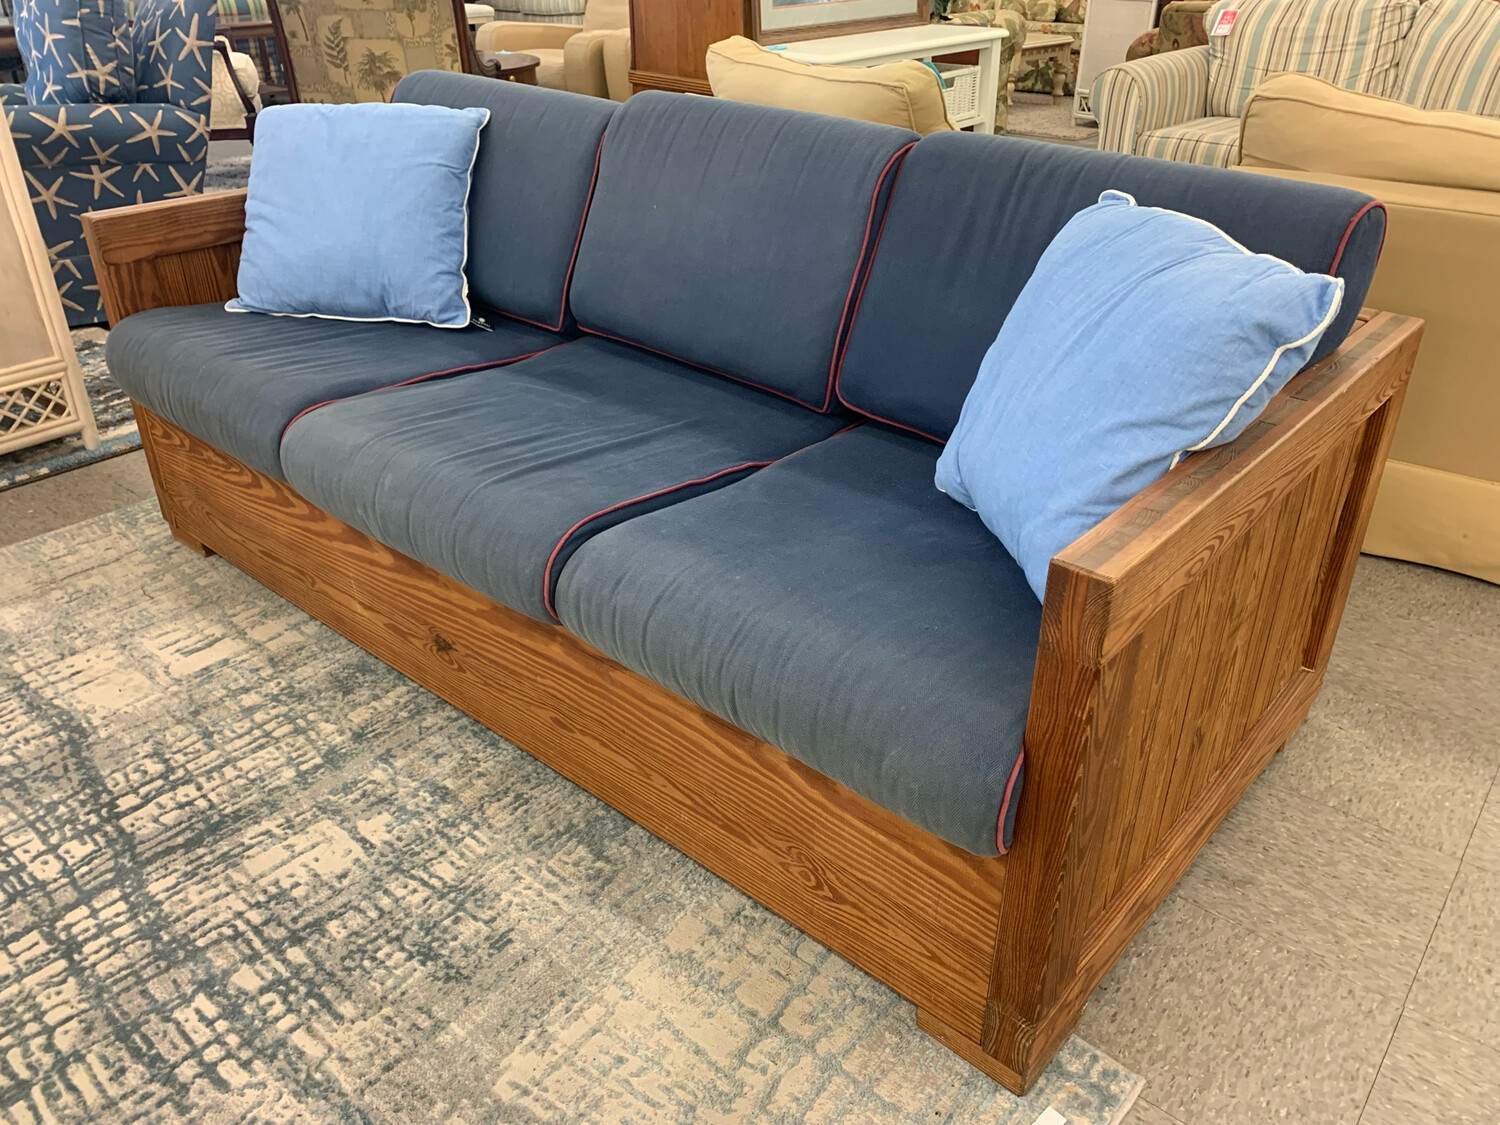 This End Up Three-Seater Sleeper Sofa